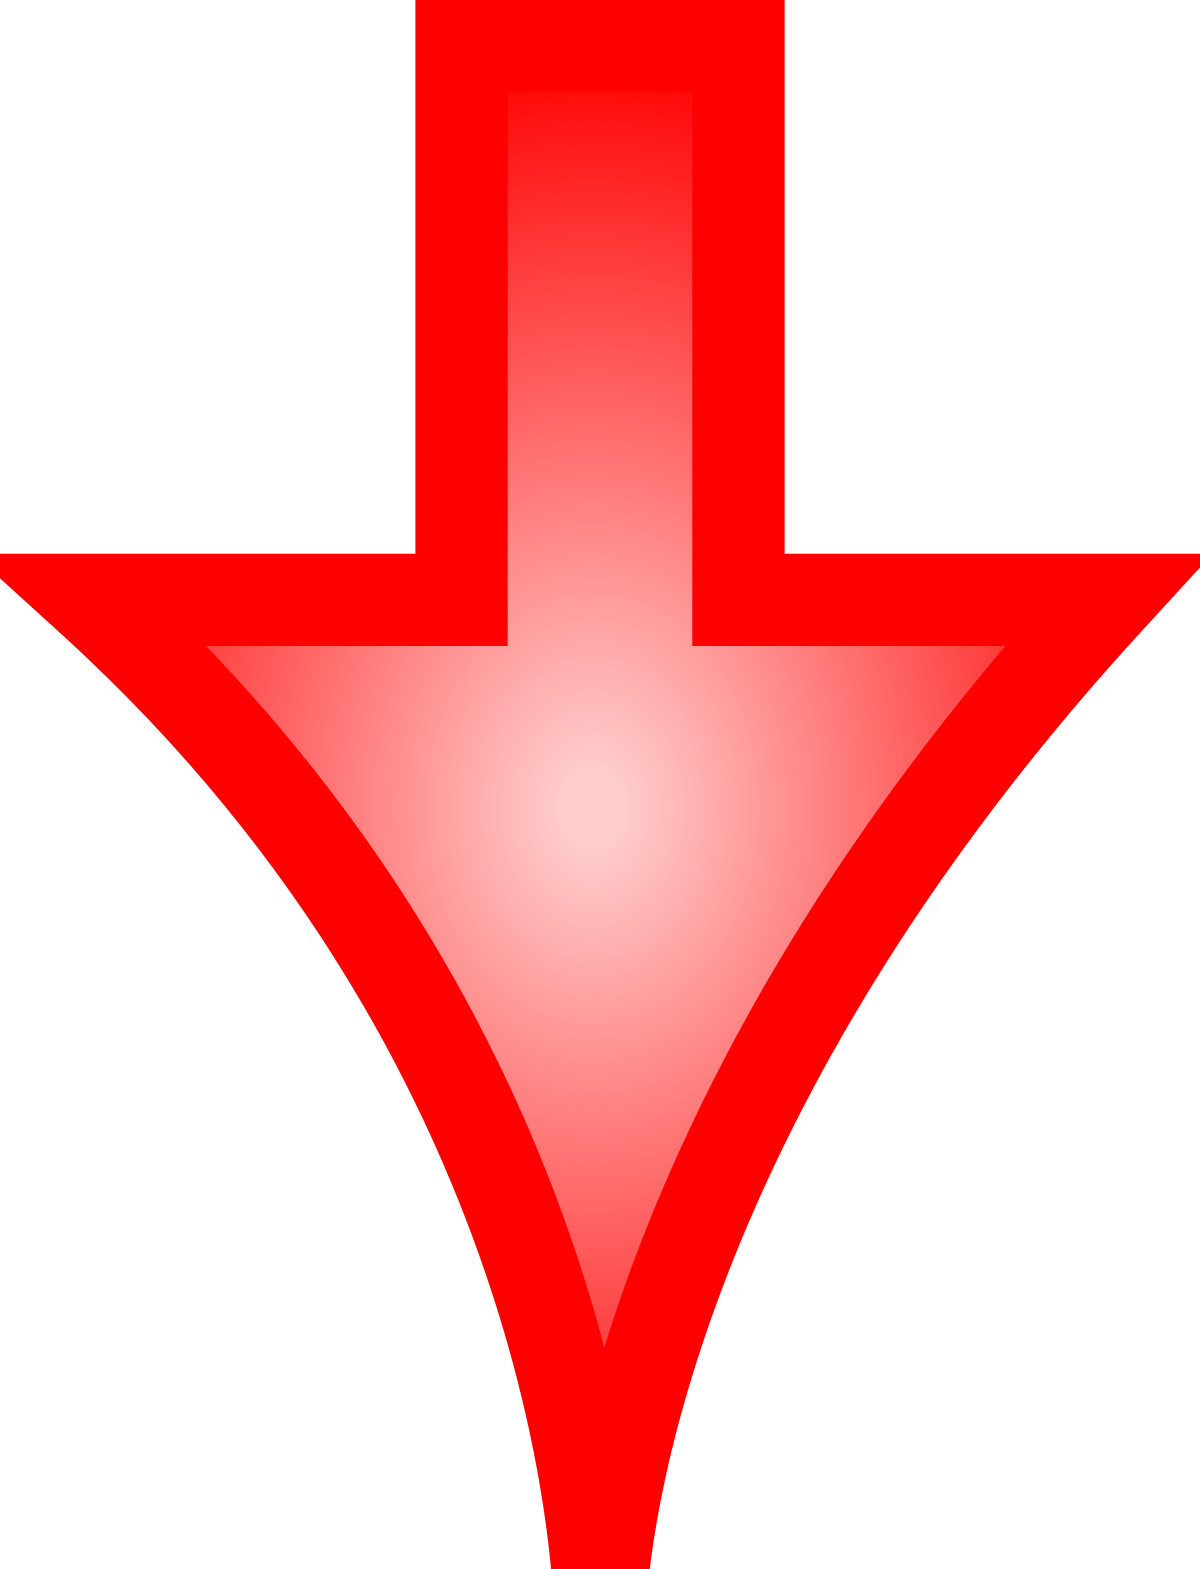 A Red Arrow Pointing Up